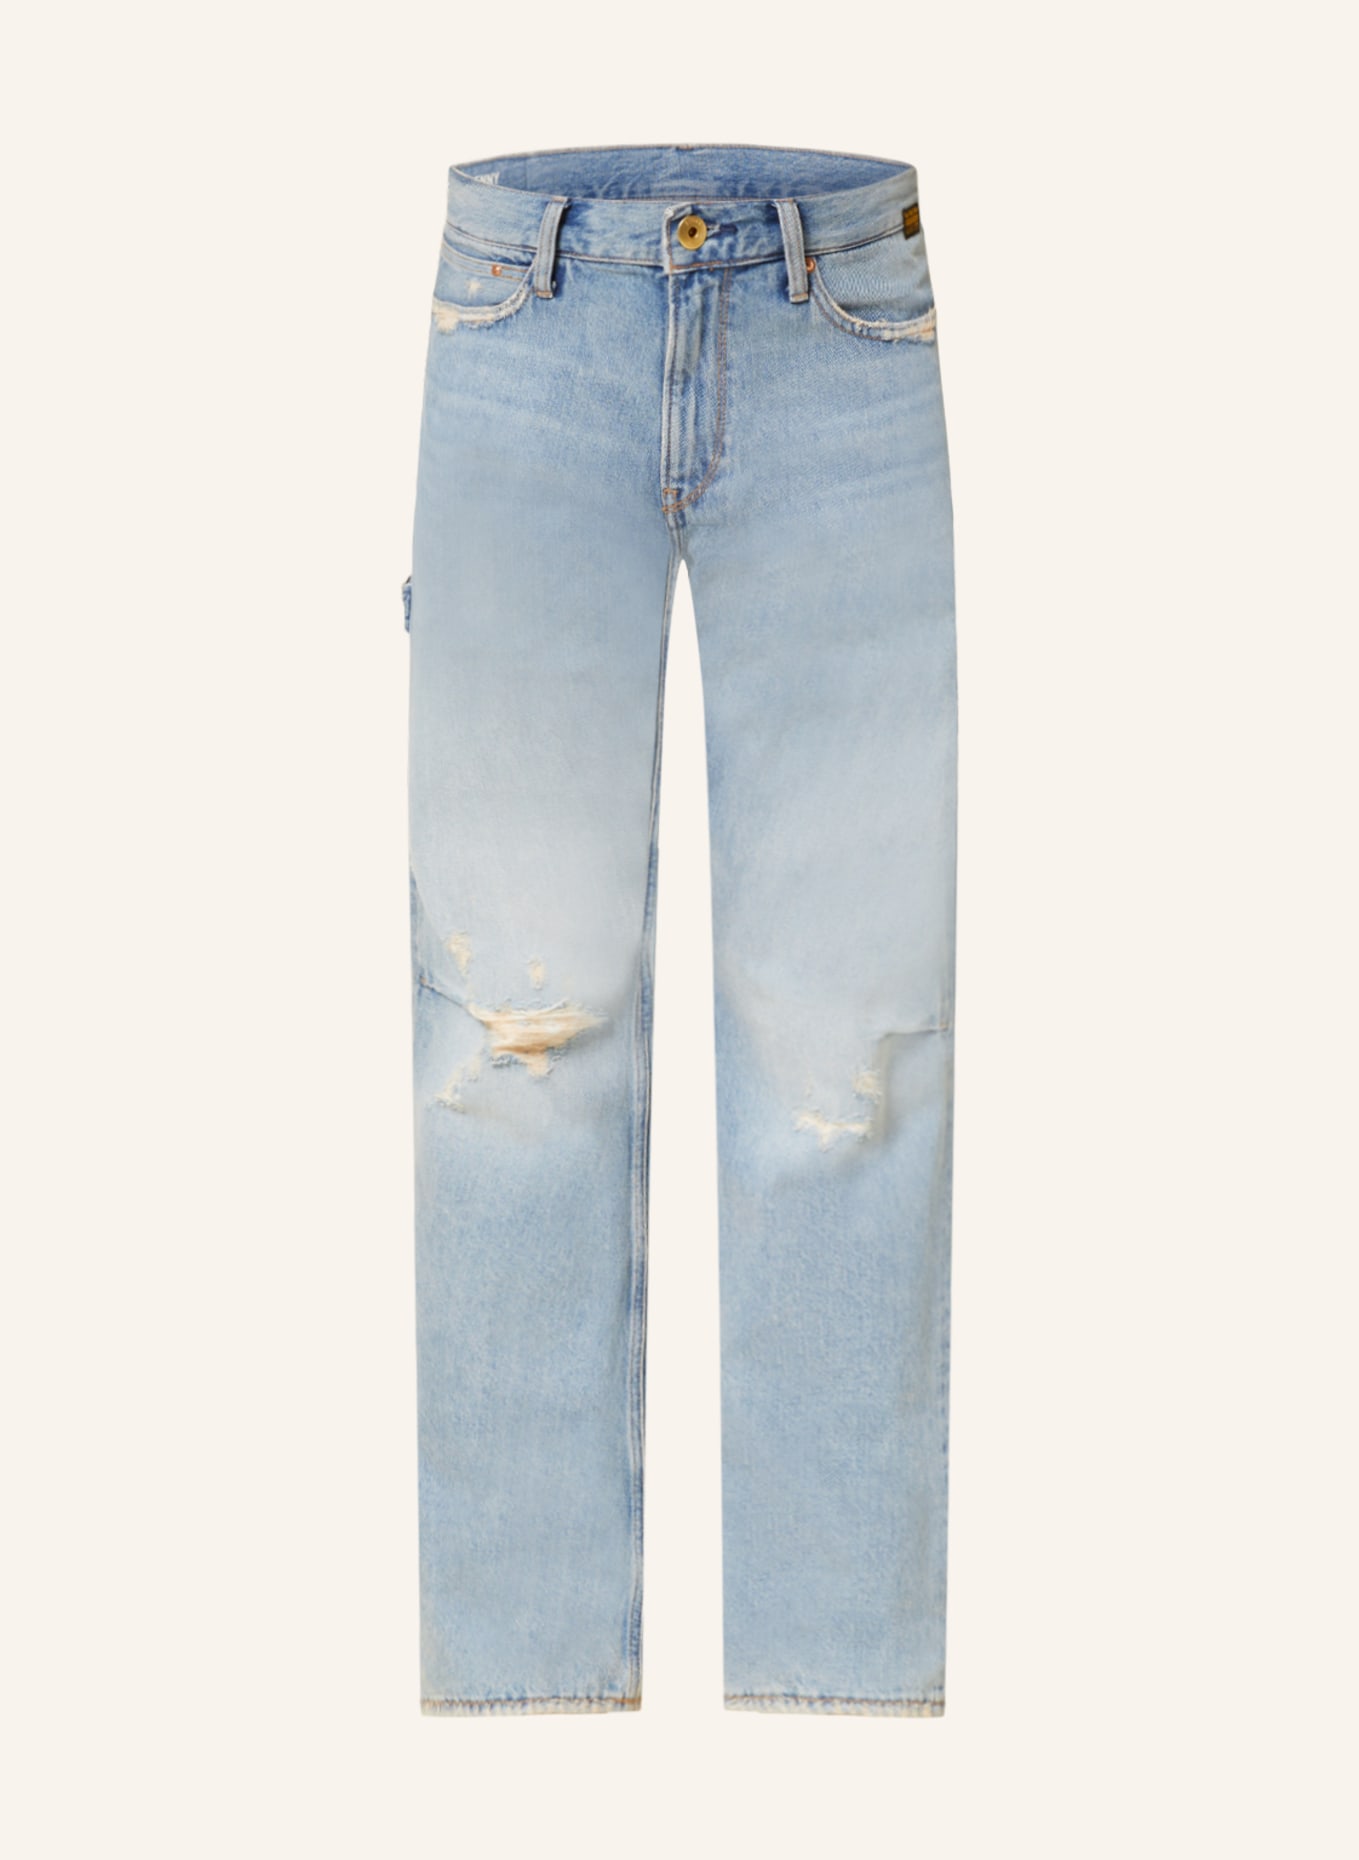 G-Star RAW Destroyed Jeans LENNEY BOOTCUT Regular Fit, Farbe: G672 sun faded ripped fogbow (Bild 1)